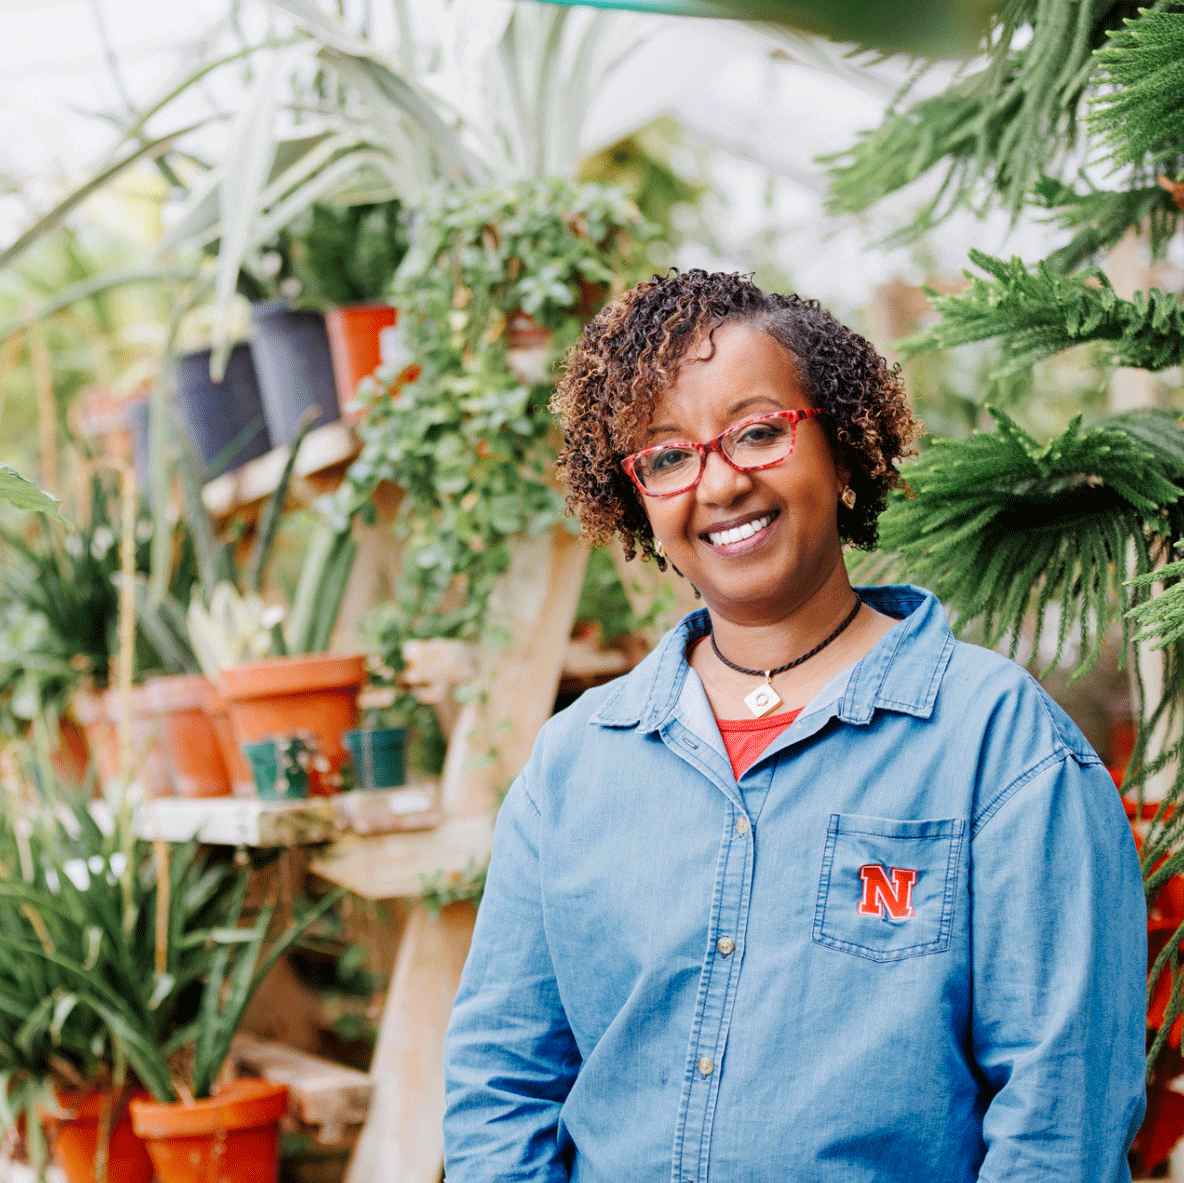 Thanks to the work of Huskers like Martha Mamo, UNL's agricultural research is supporting farmers and ranchers across the state and beyond, from crop management to plant genetics.